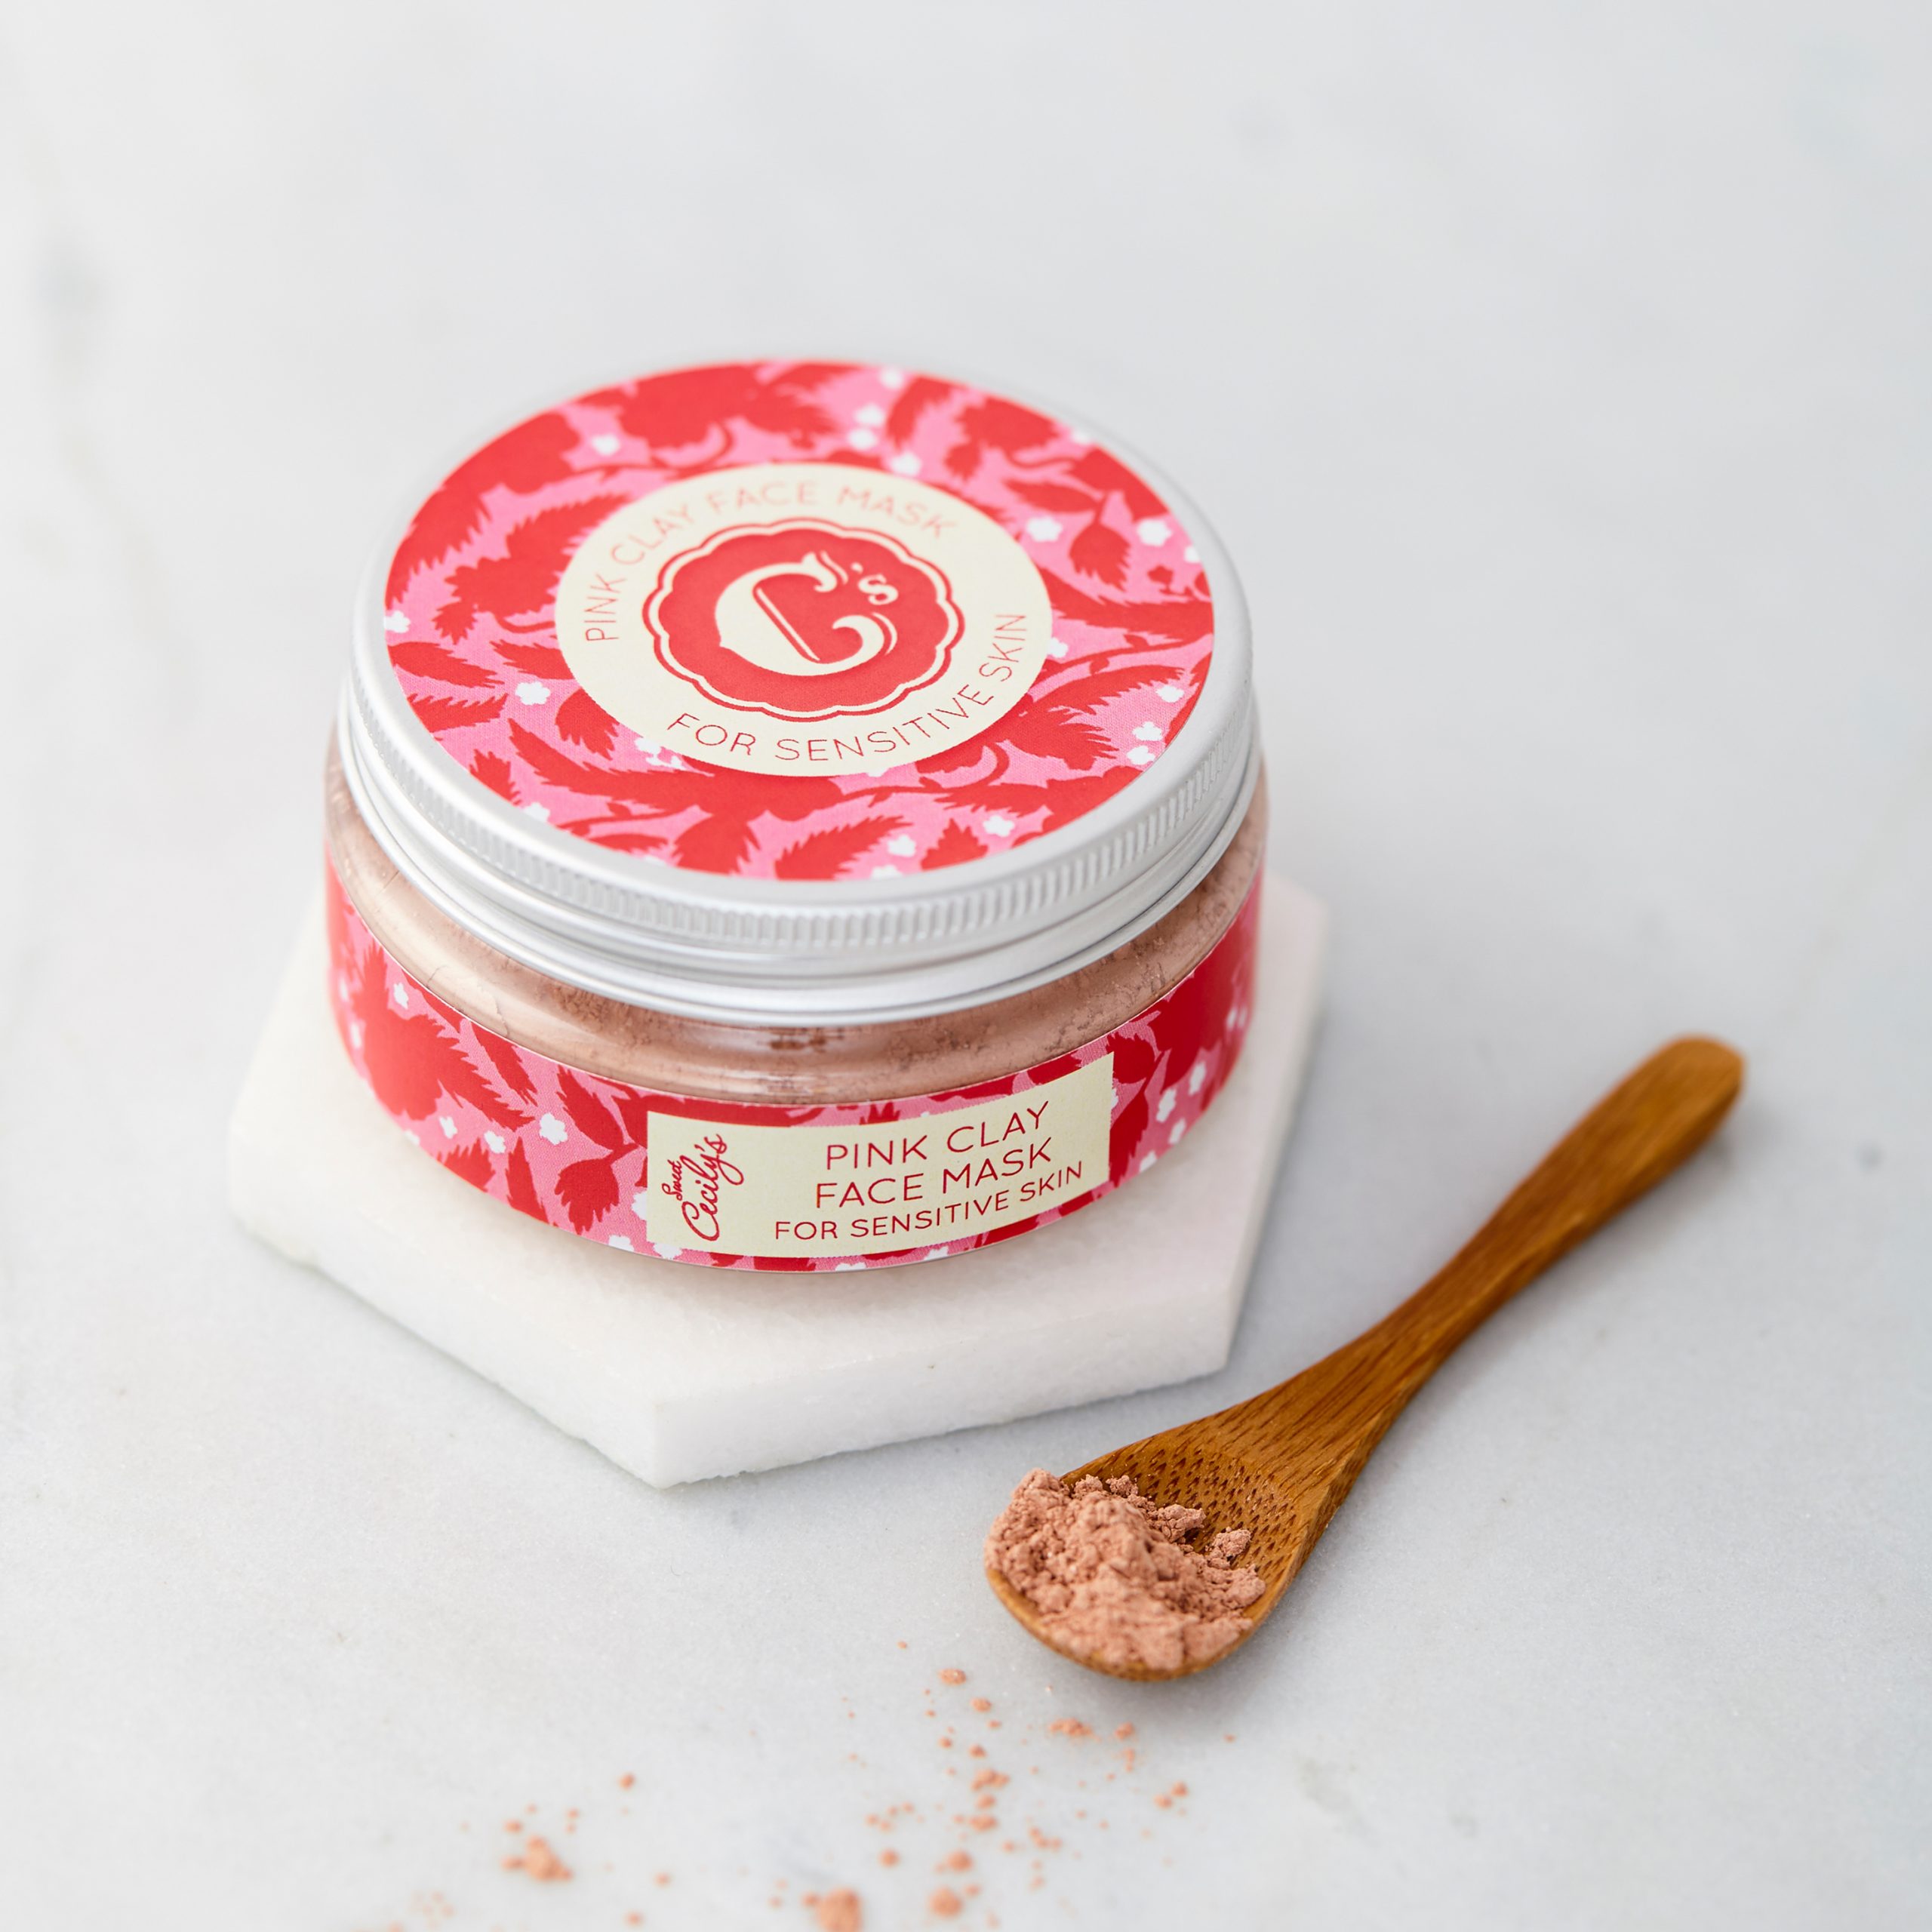 Sweet Cecily Pink Clay Face Mask